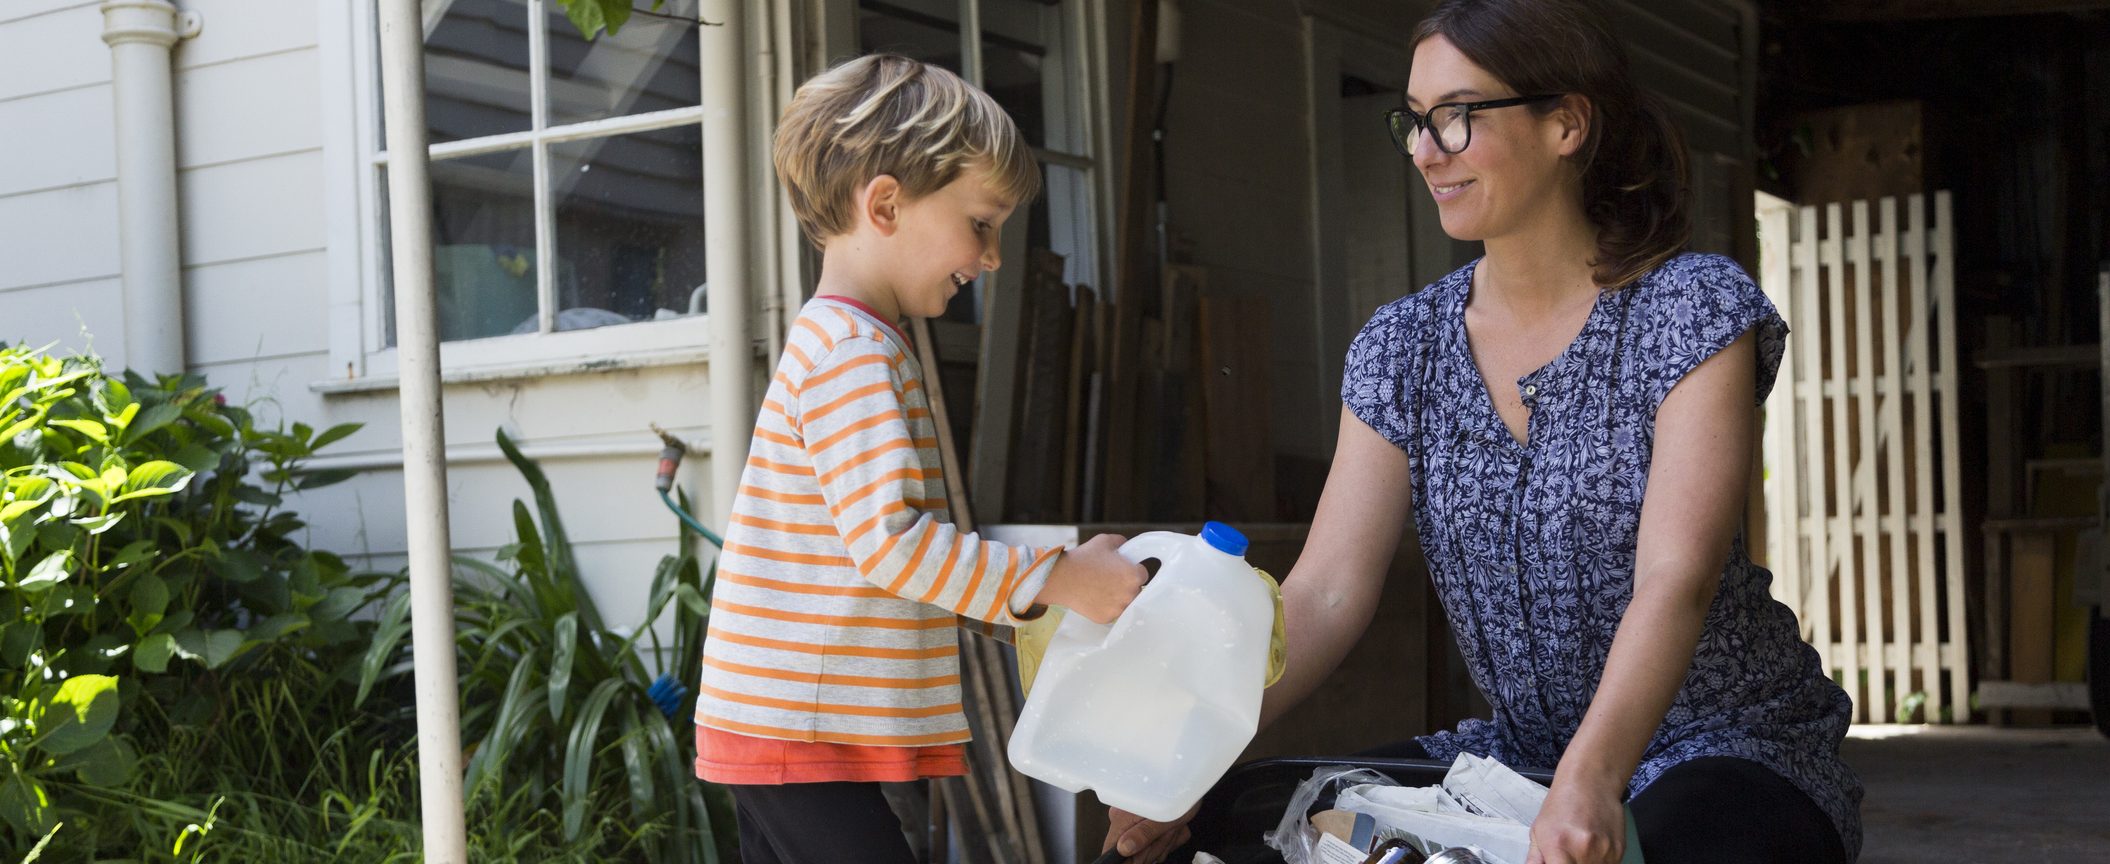 A little kid is holding an empty plastic milk jug while a smiling woman holds a box of recycled products.